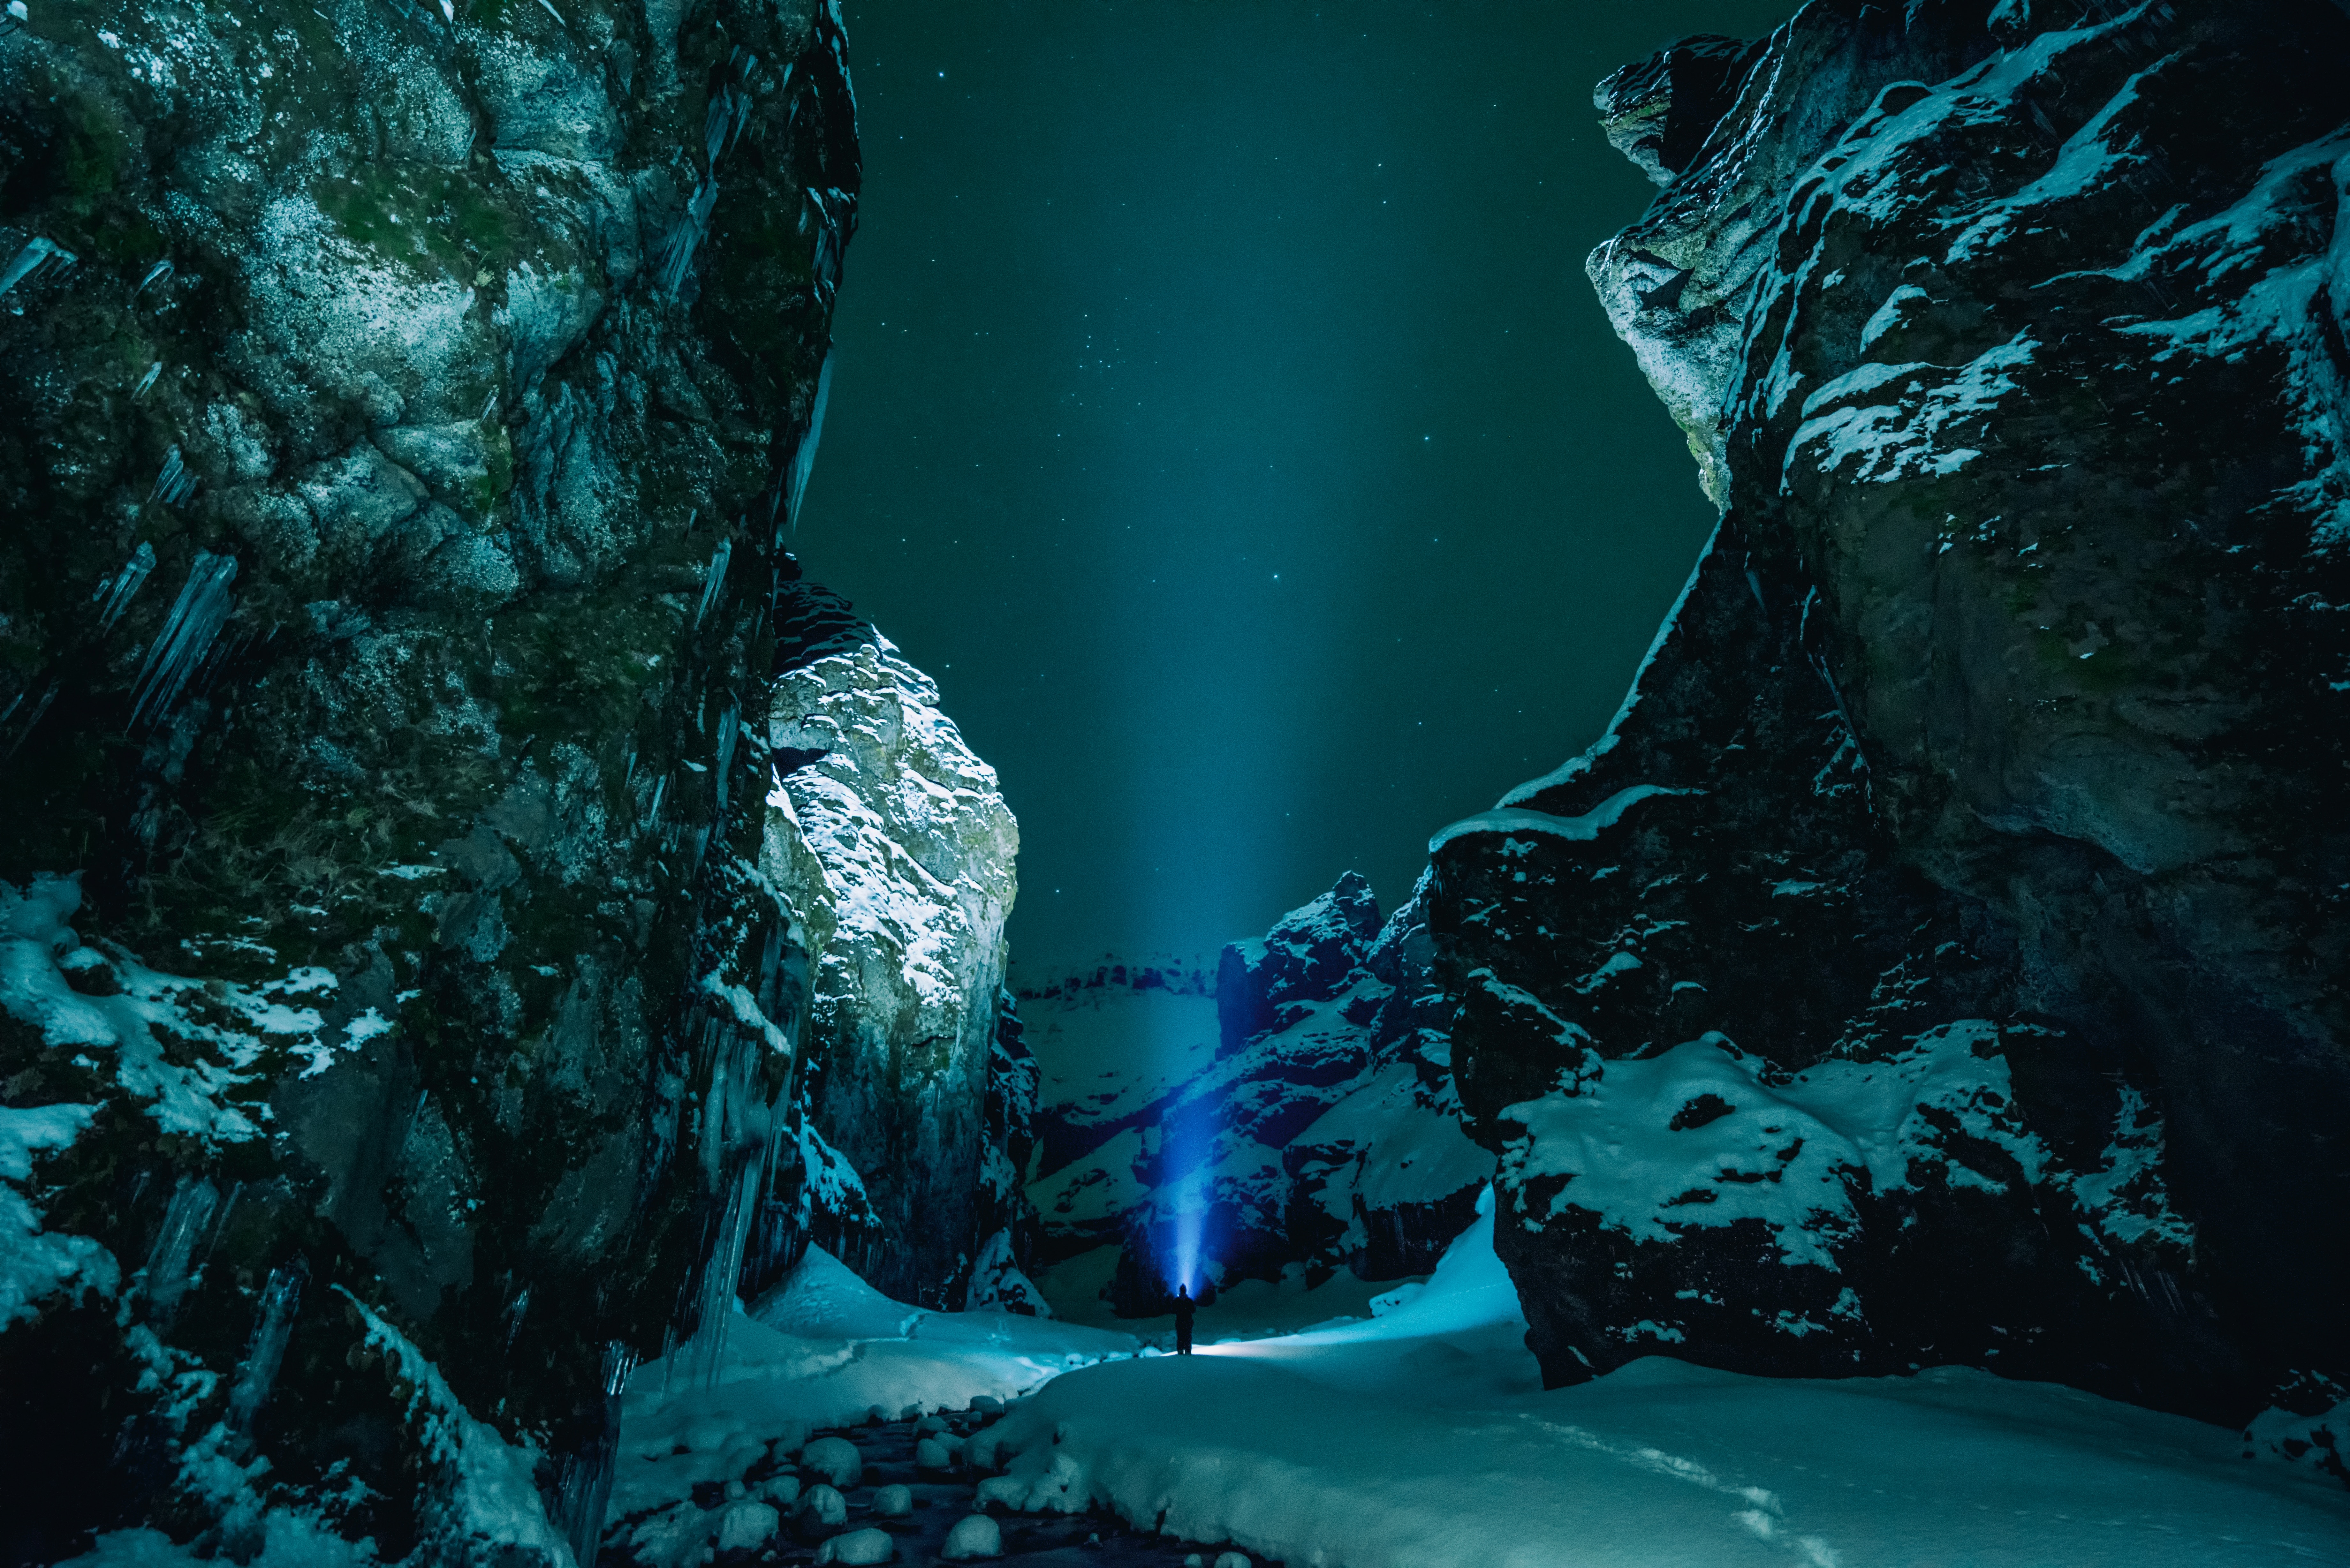 General 7360x4912 nature landscape mountains rocks snow winter night lights men clear sky stars footprints icicle turquoise blue stream low light